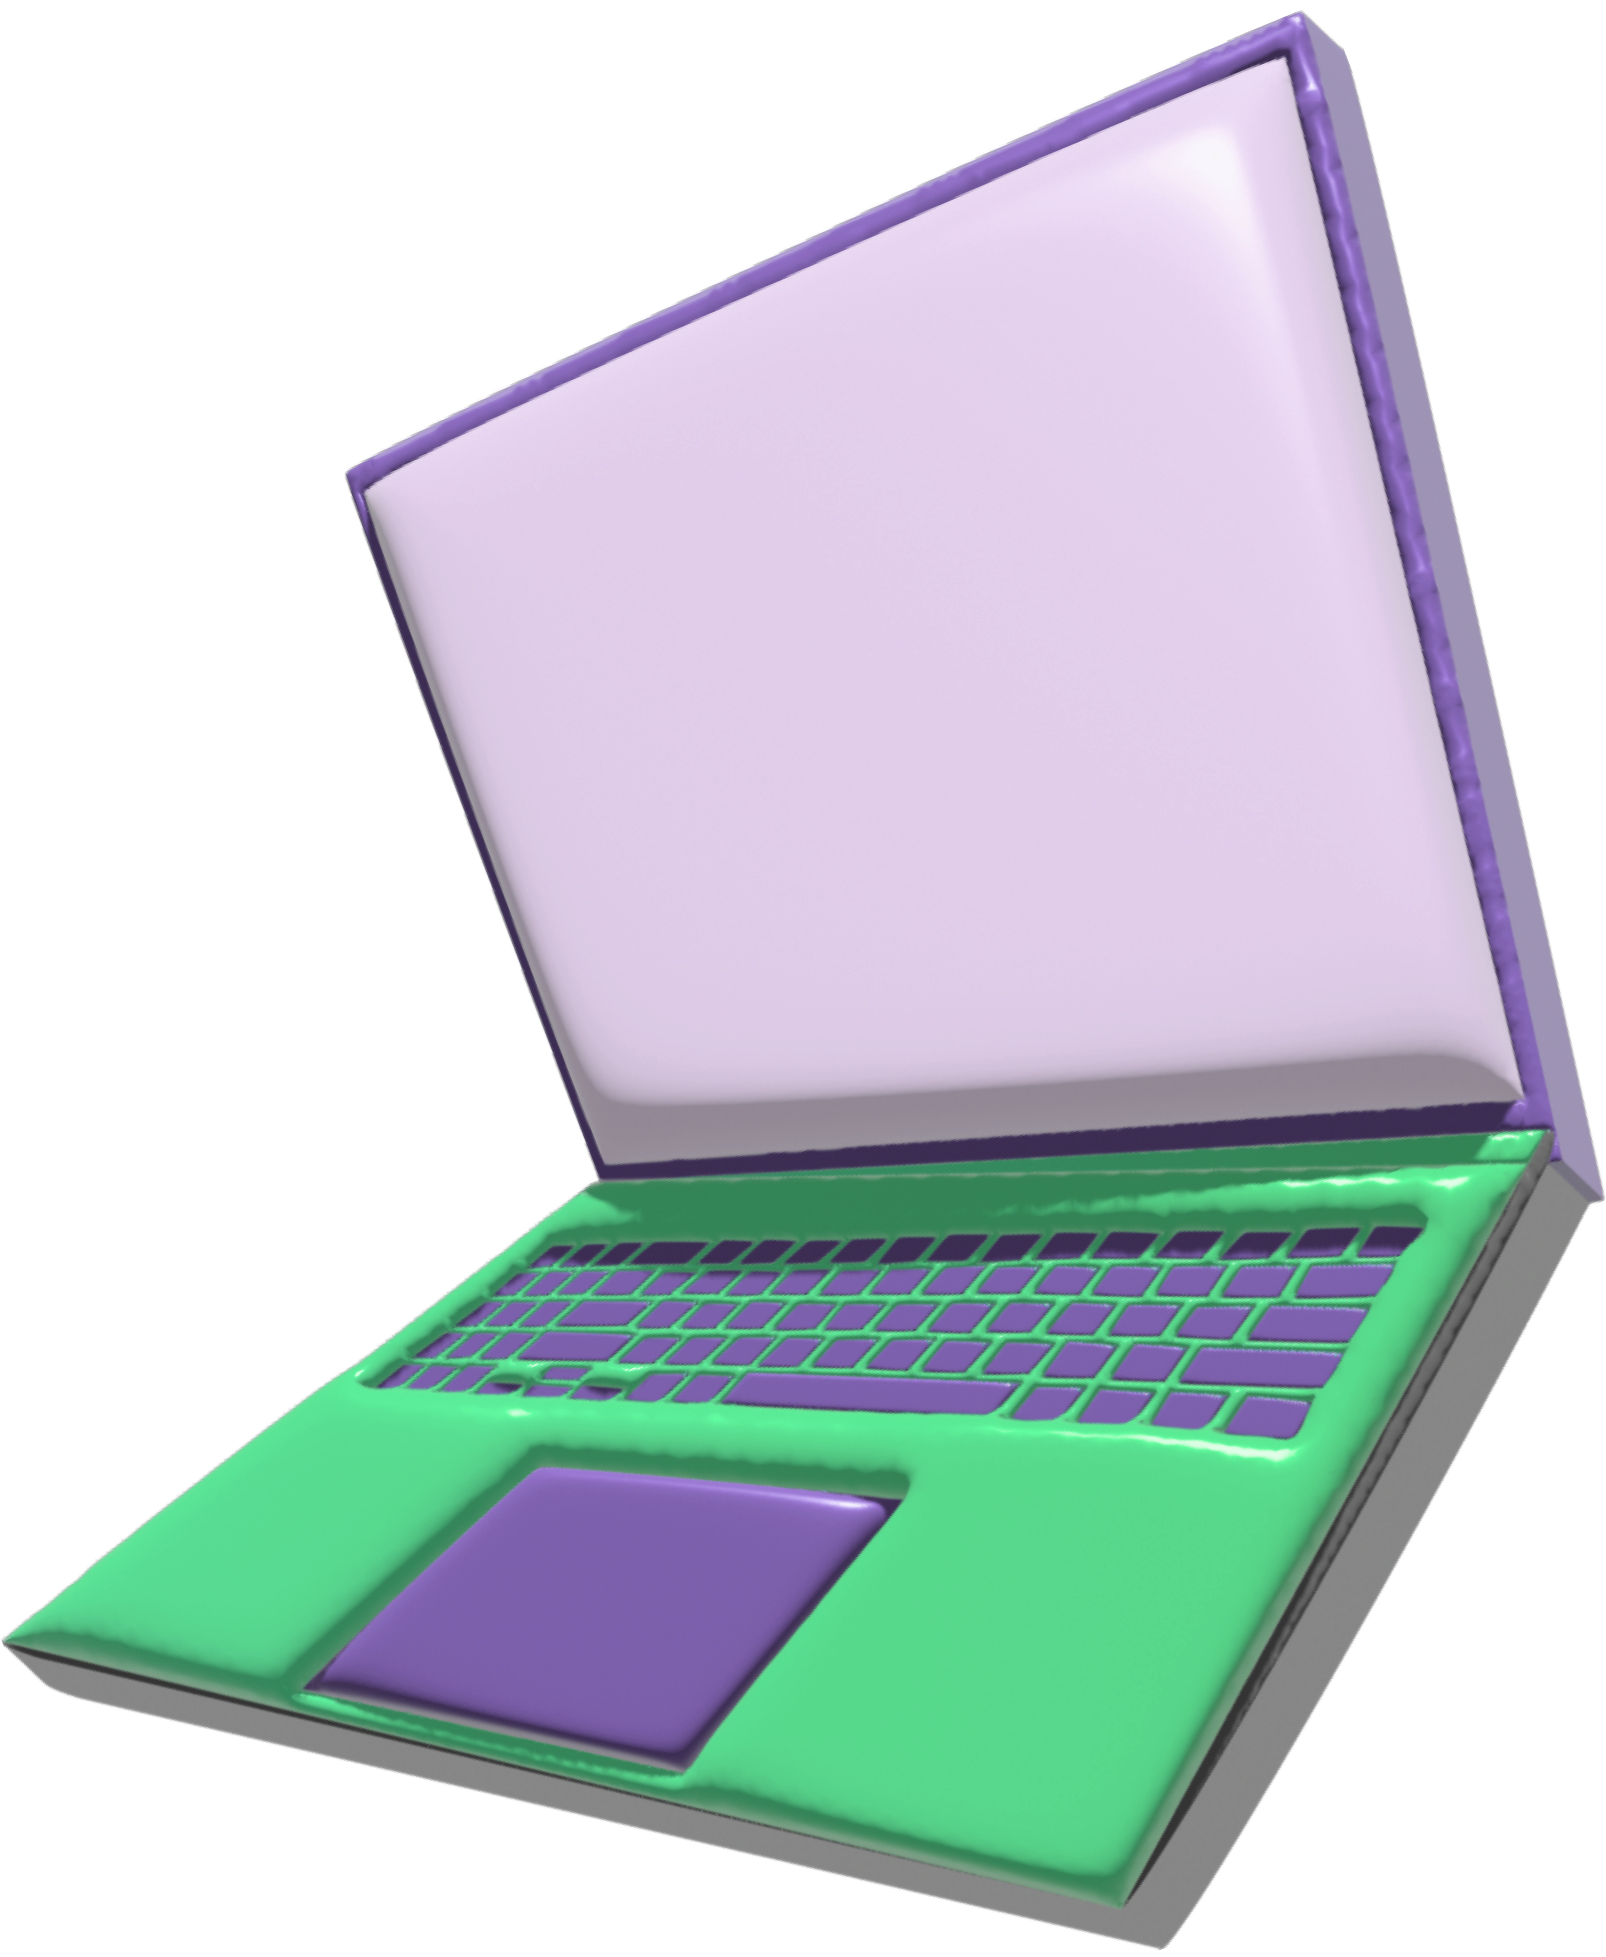 A 3D render of a floating laptop